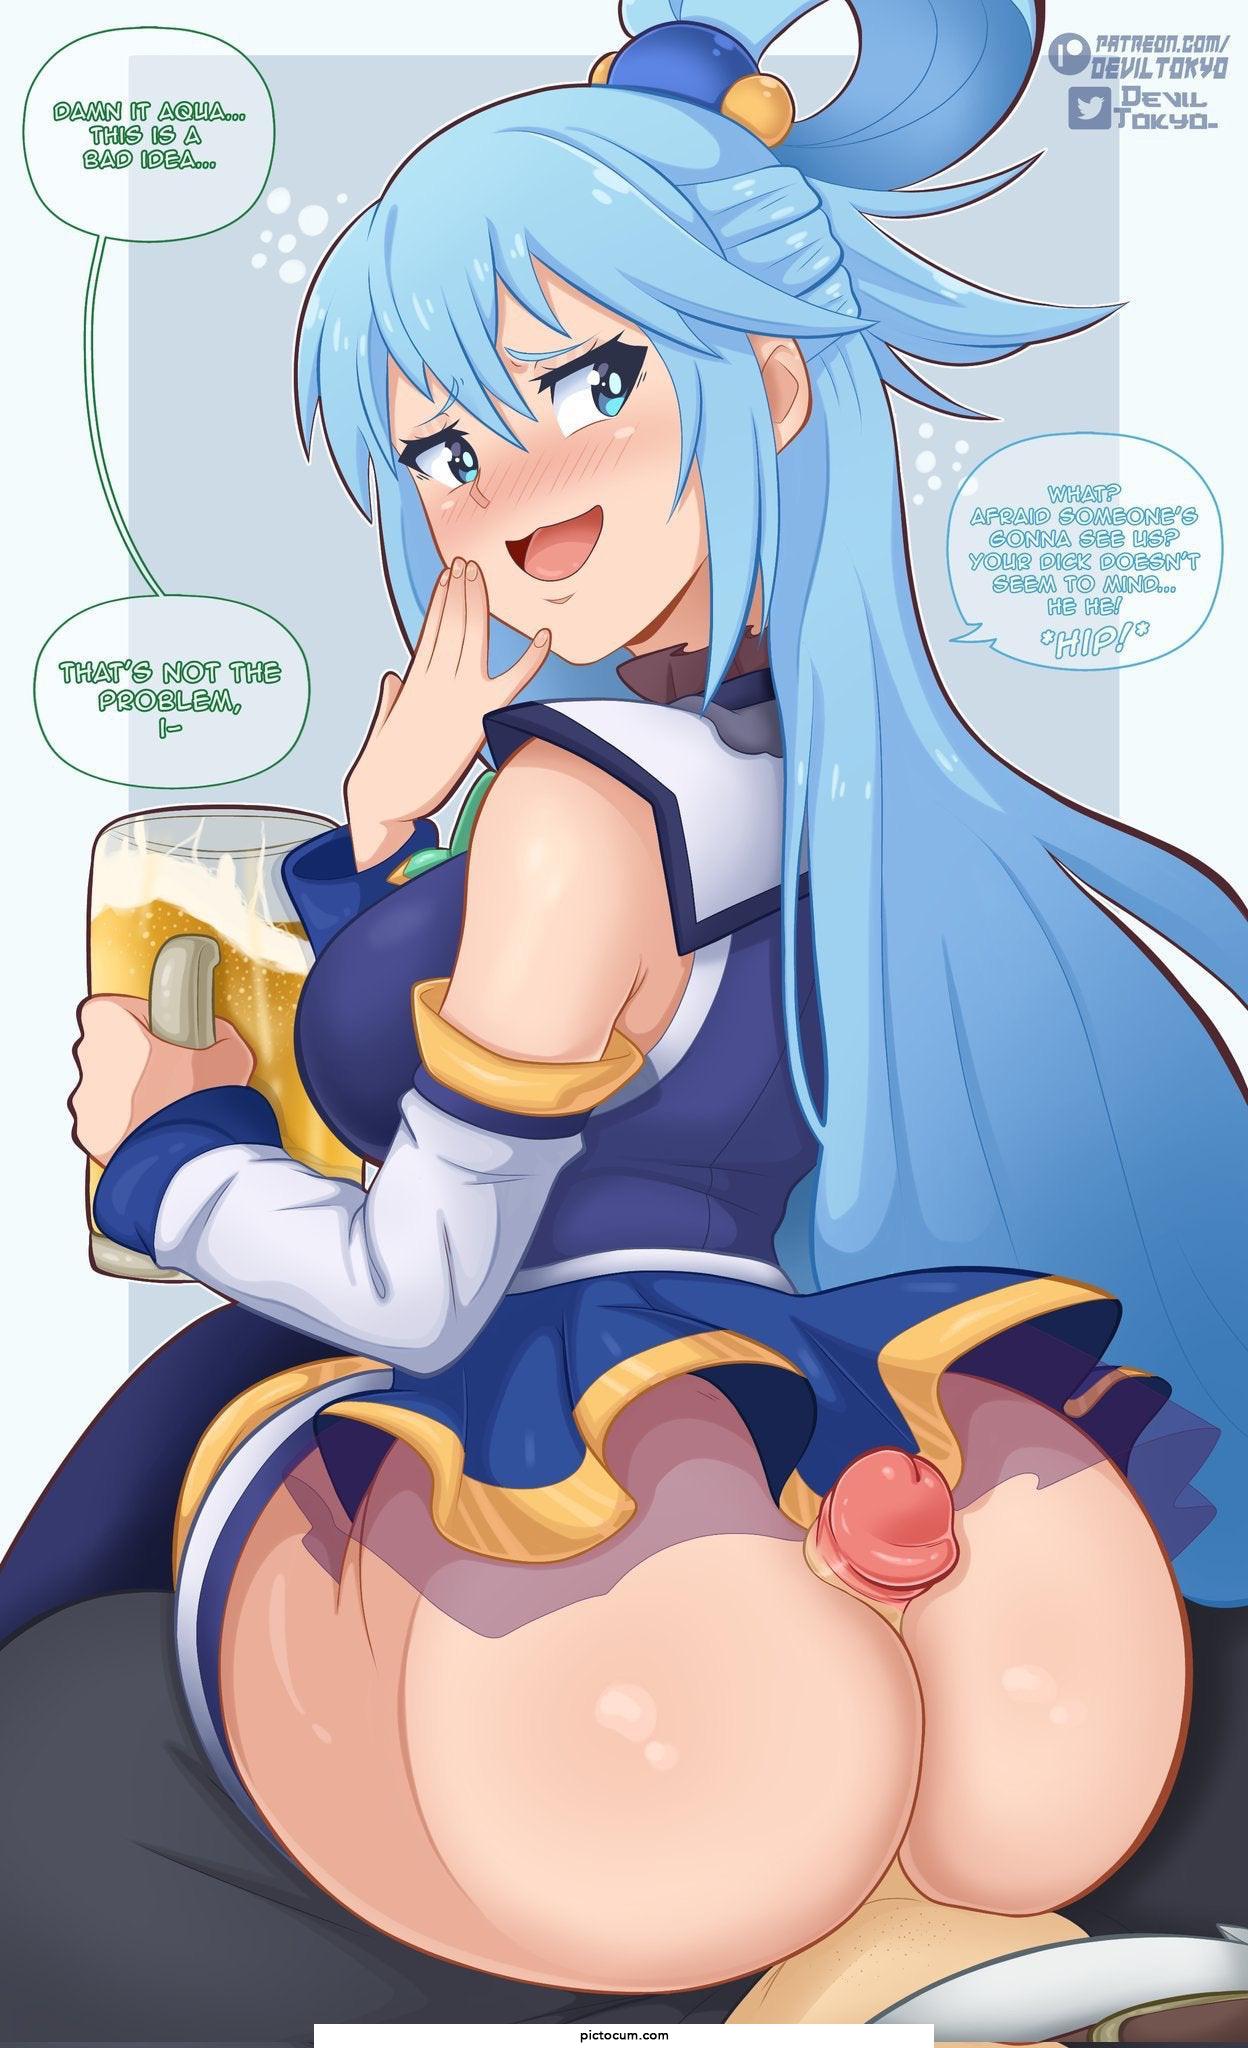 Aqua and her new party tricks